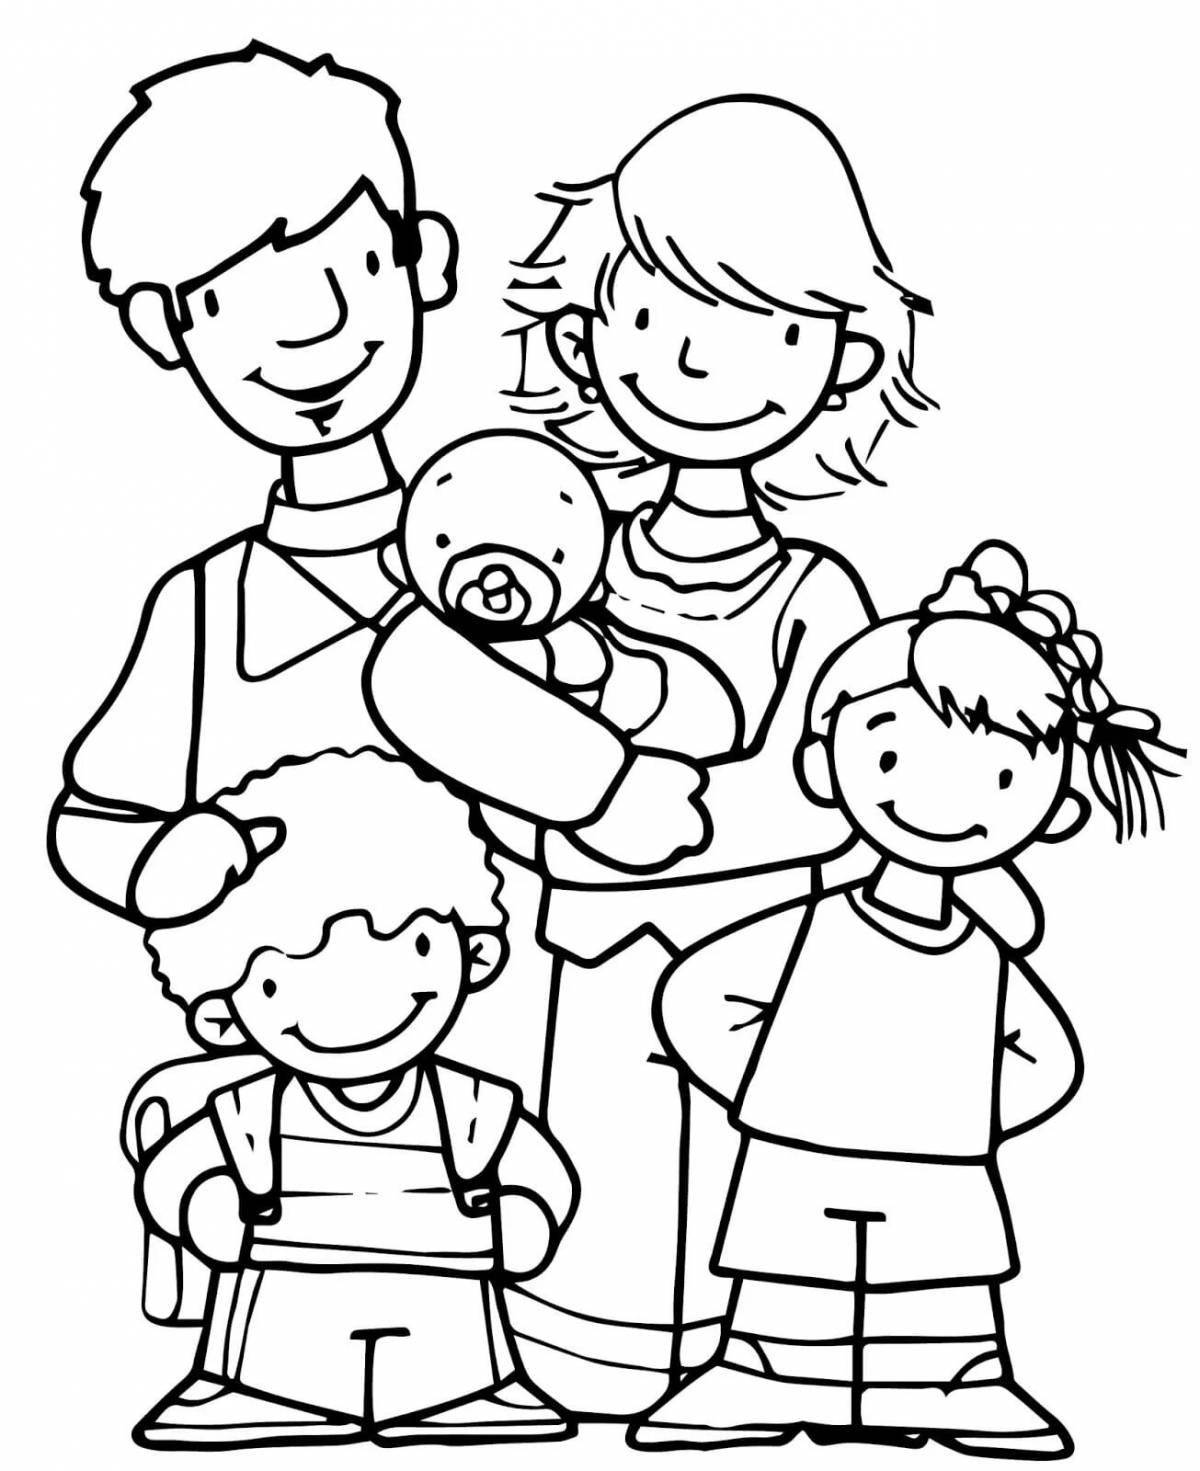 Bright coloring page my family